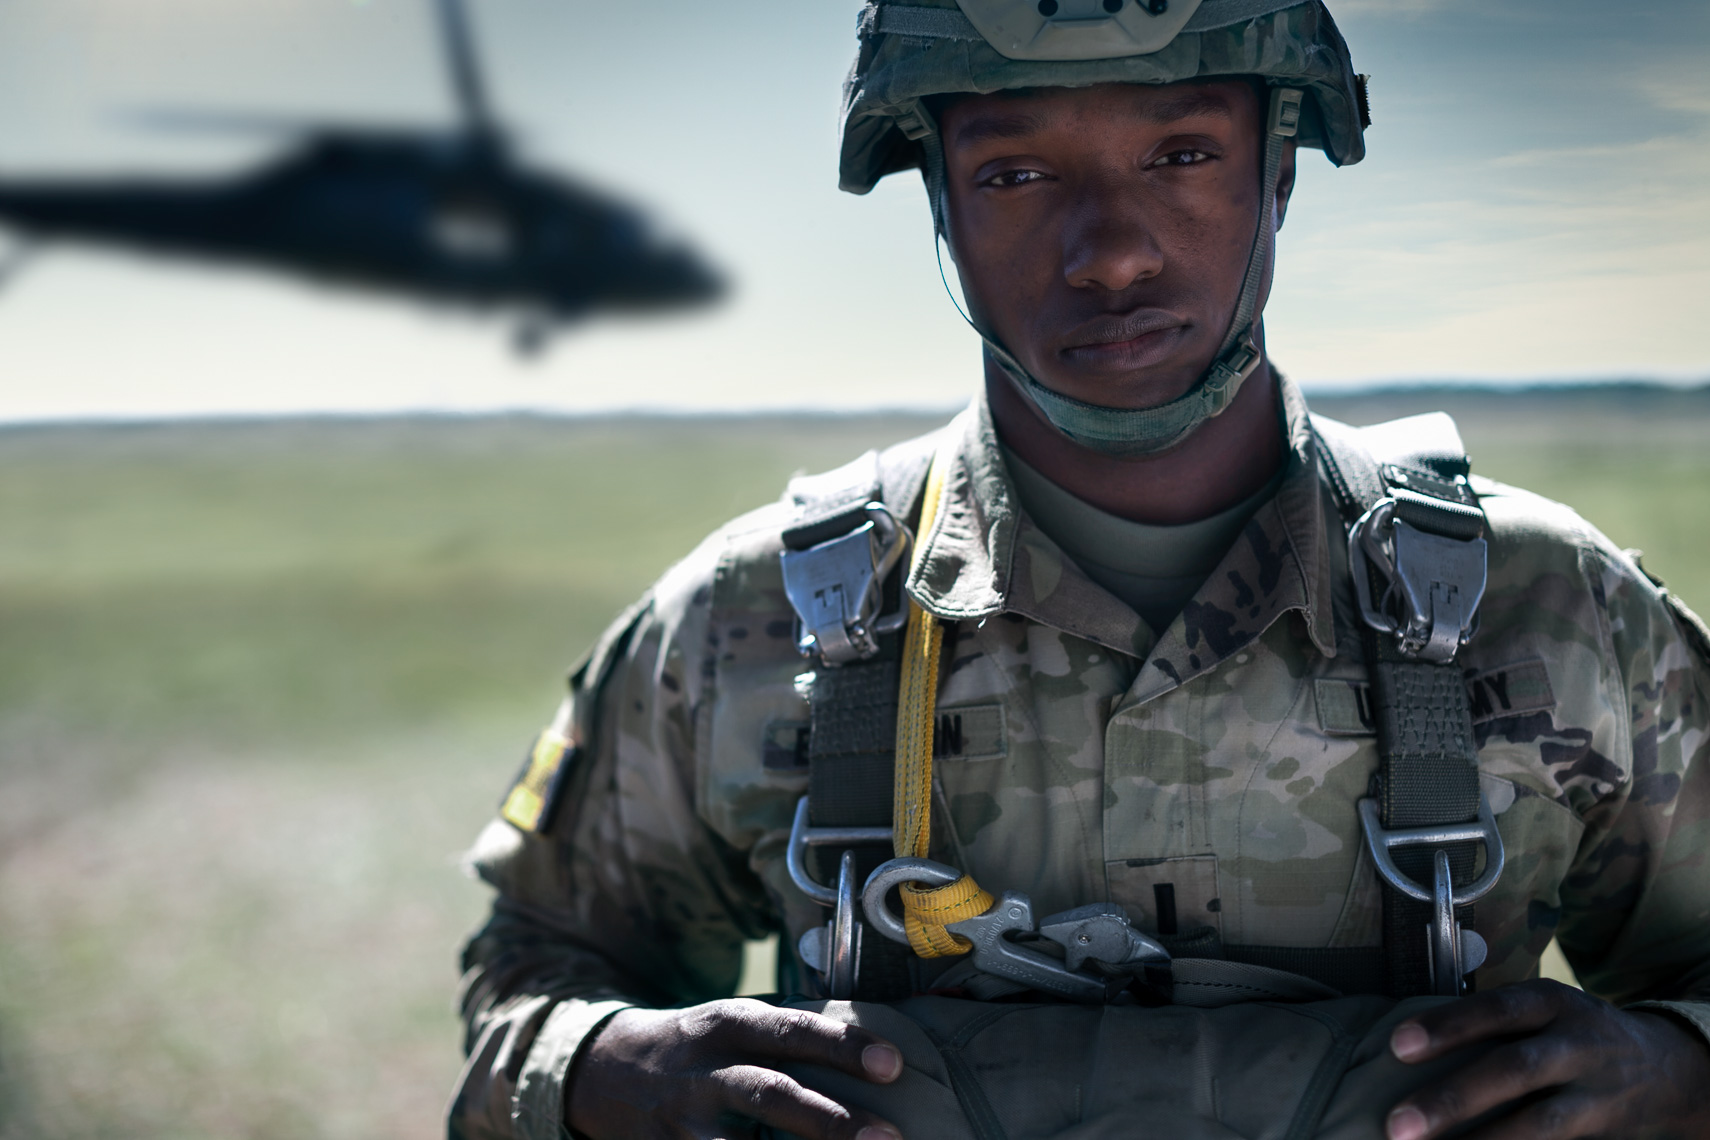 82d_Airborne_Judge_Advocate_Training_20191018_photo_by_Justin_Kase_Conder_2163_Retouched